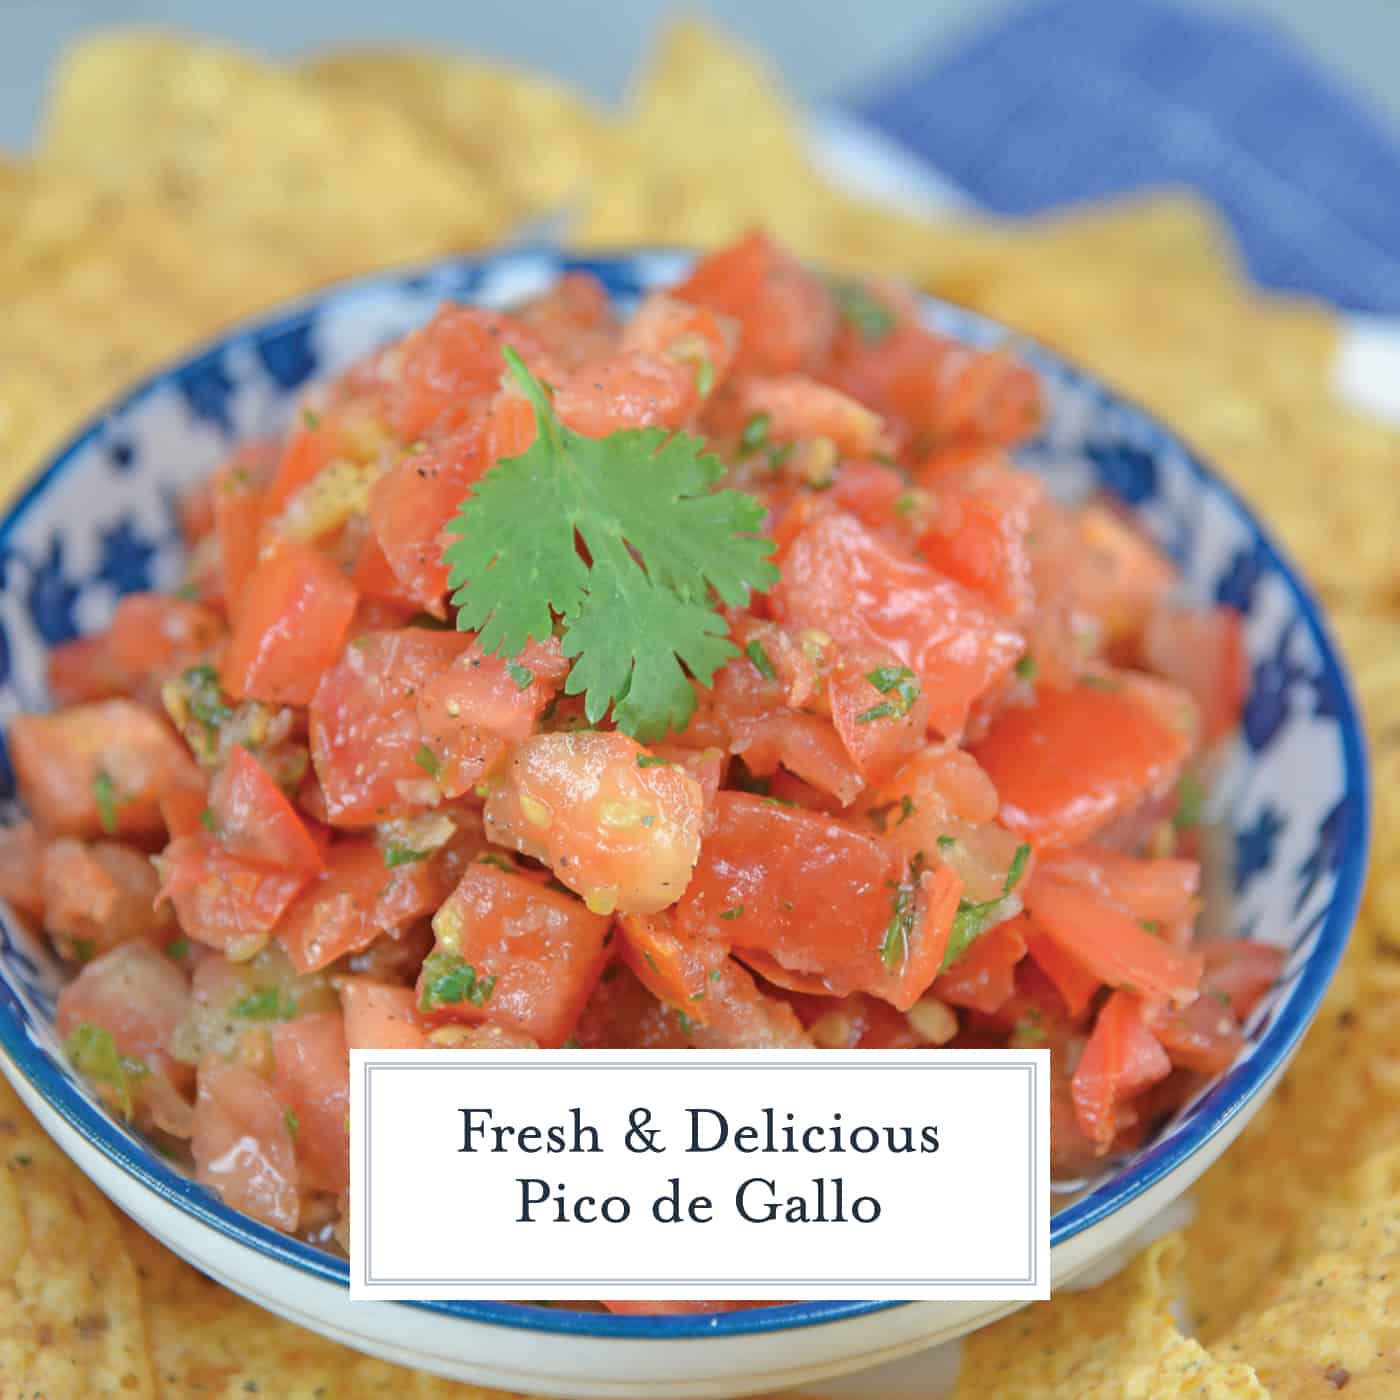 Pico de Gallo, also known as salsa fresca, is made from fresh tomato, onion, cilantro, hot pepper and lime juice. Perfect with tortilla chips! #picodegallo #homemadesalsa www.savoryexperiments.com 